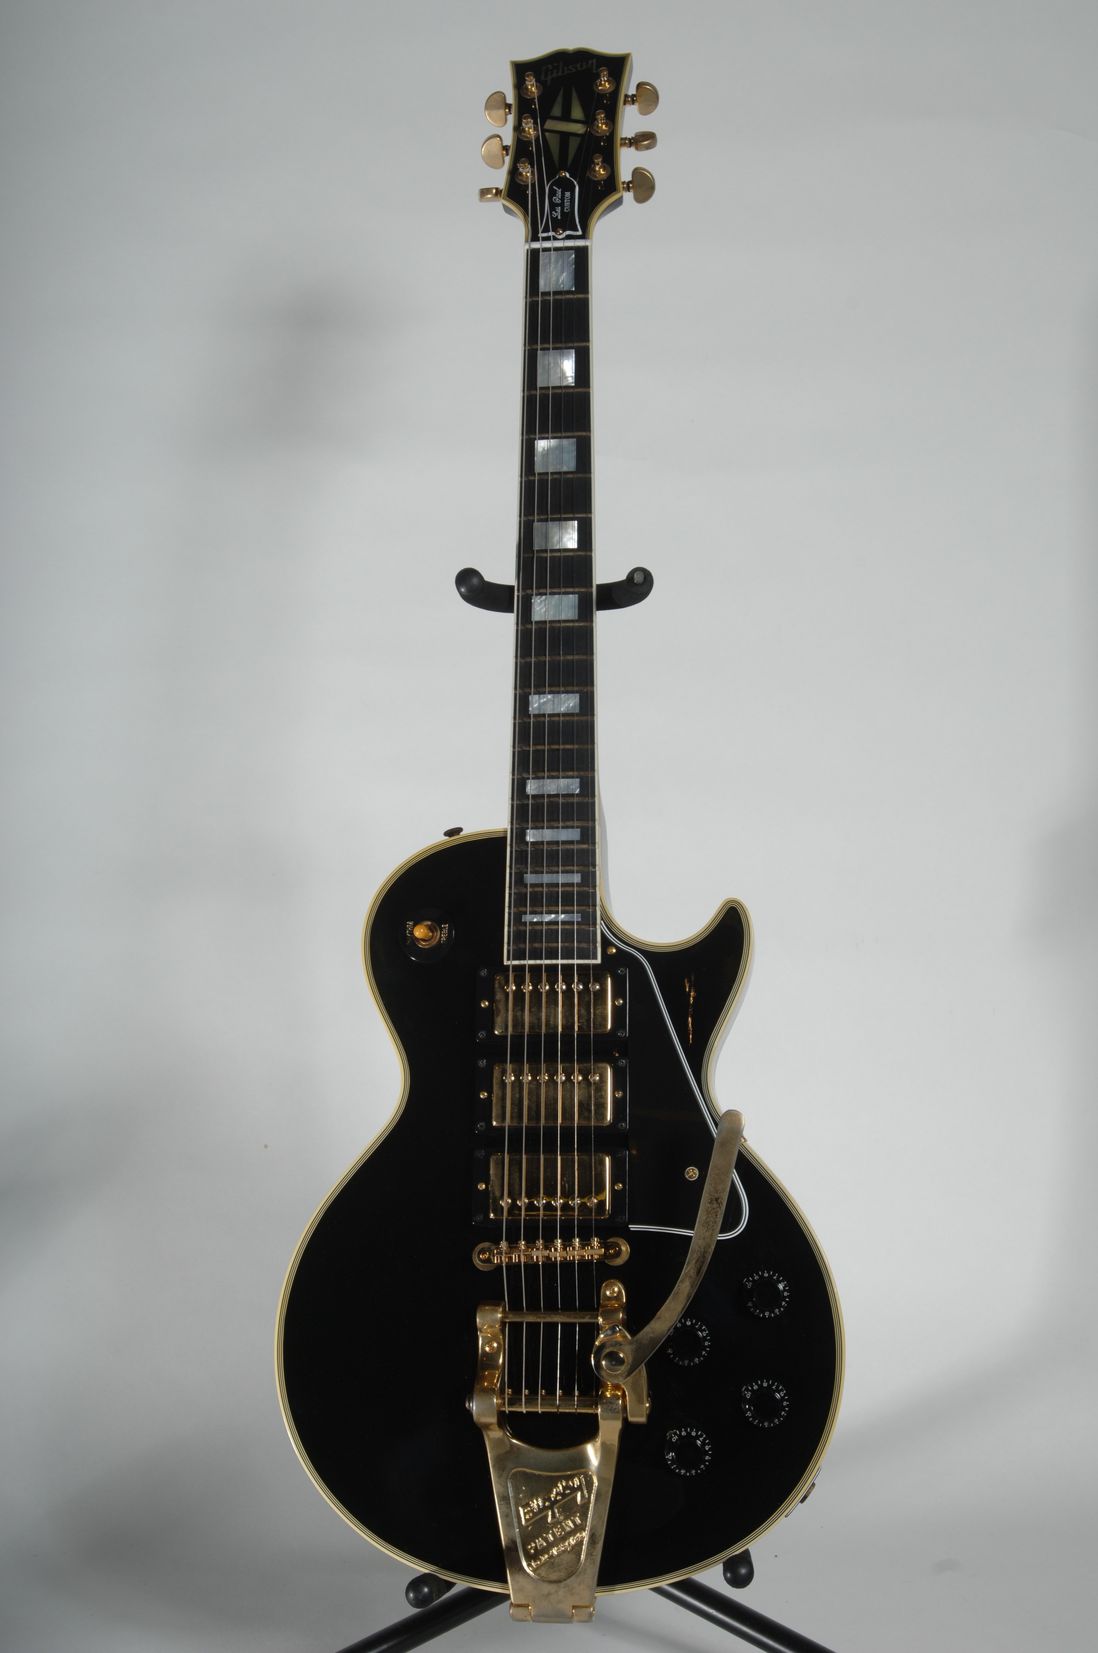 Jimmy Page acquired this Gibson Les Paul Custom in 1960 while working as a session guitarist in London, and used it in the studio from 1962 to 1967.